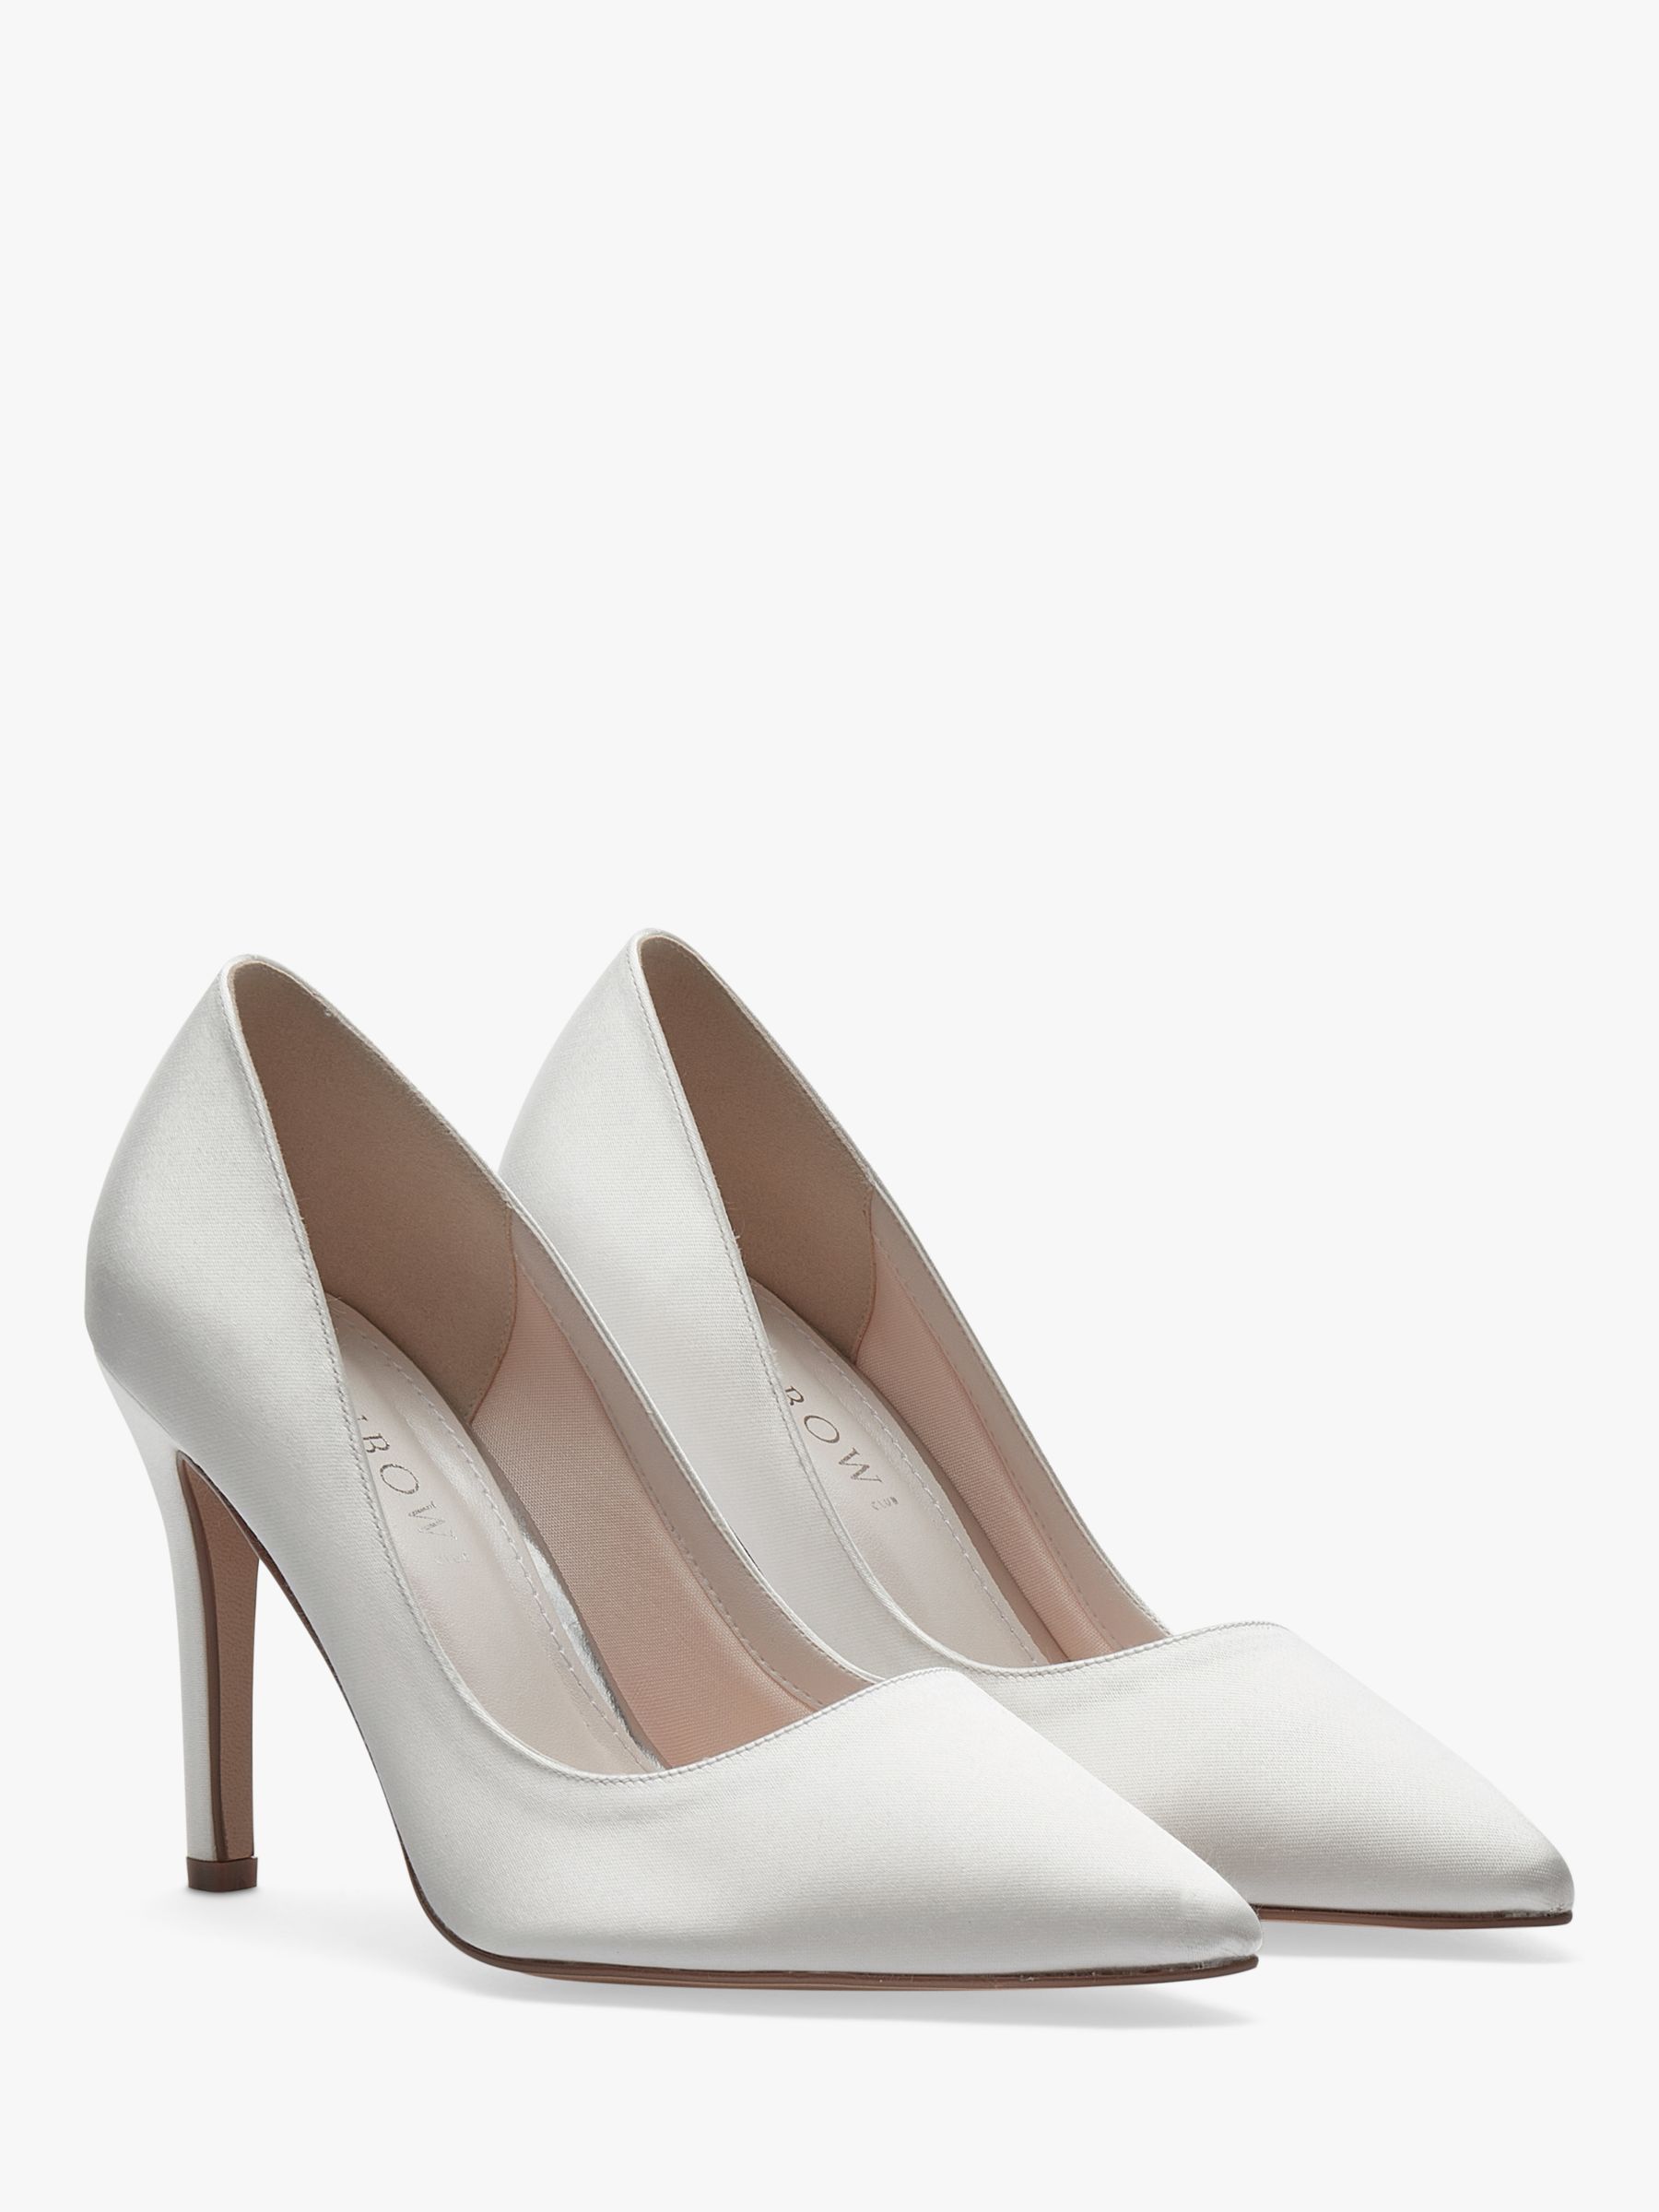 Rainbow Club Coco Pointed Court Shoes, Ivory Satin at John Lewis & Partners